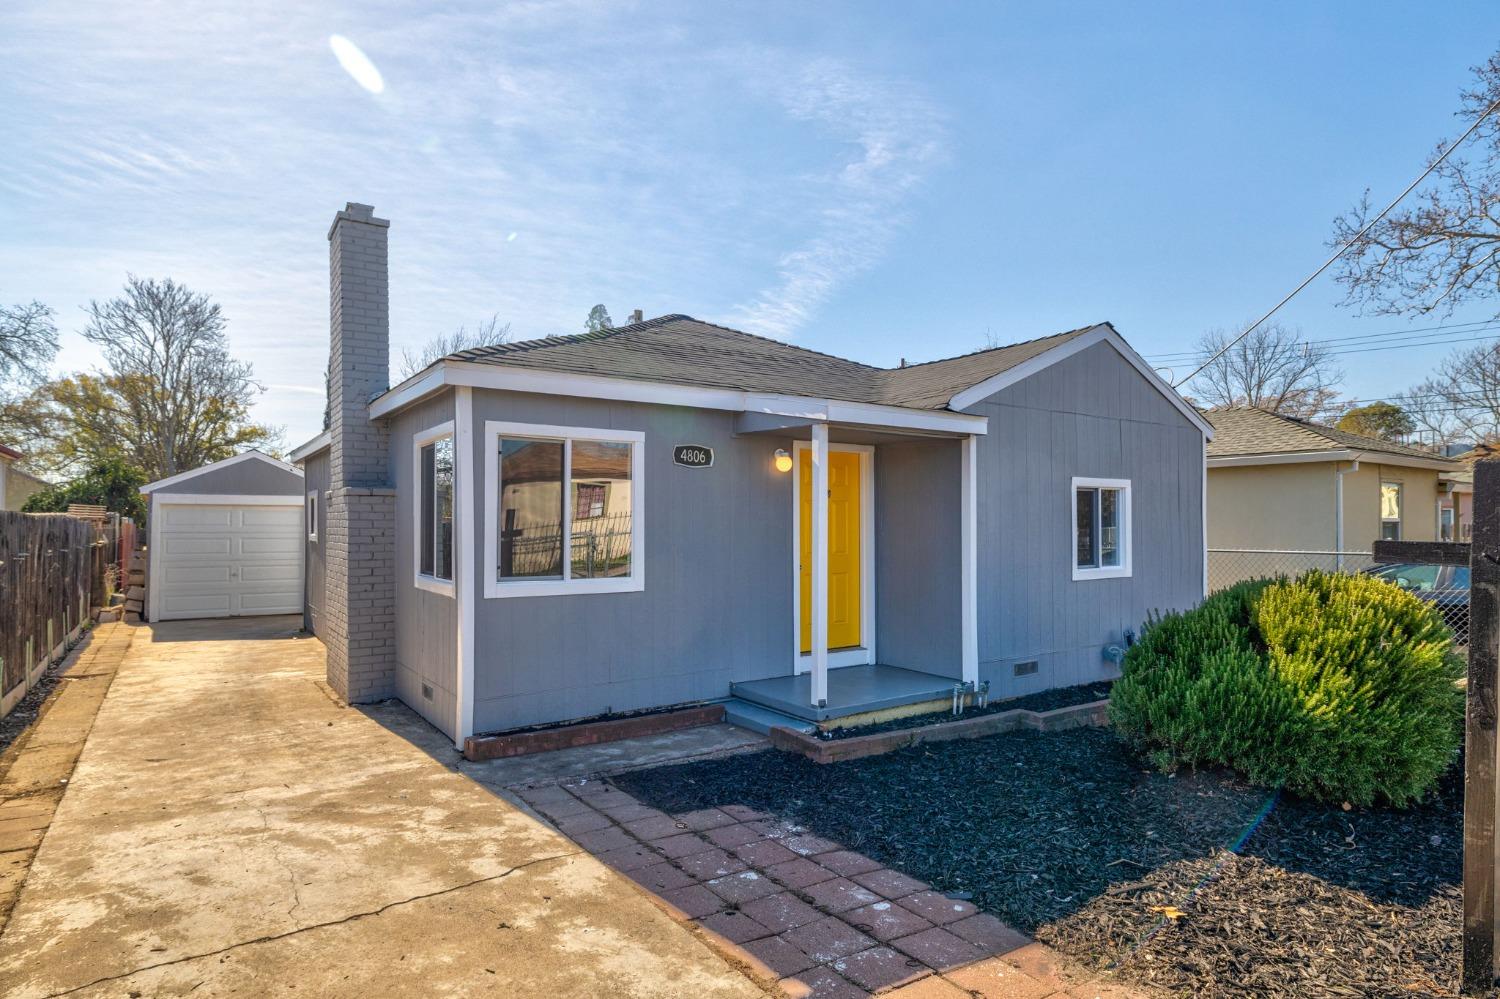 Classic 1940s Bungalow available in South Oak Park with updates and detached single car garage on a 